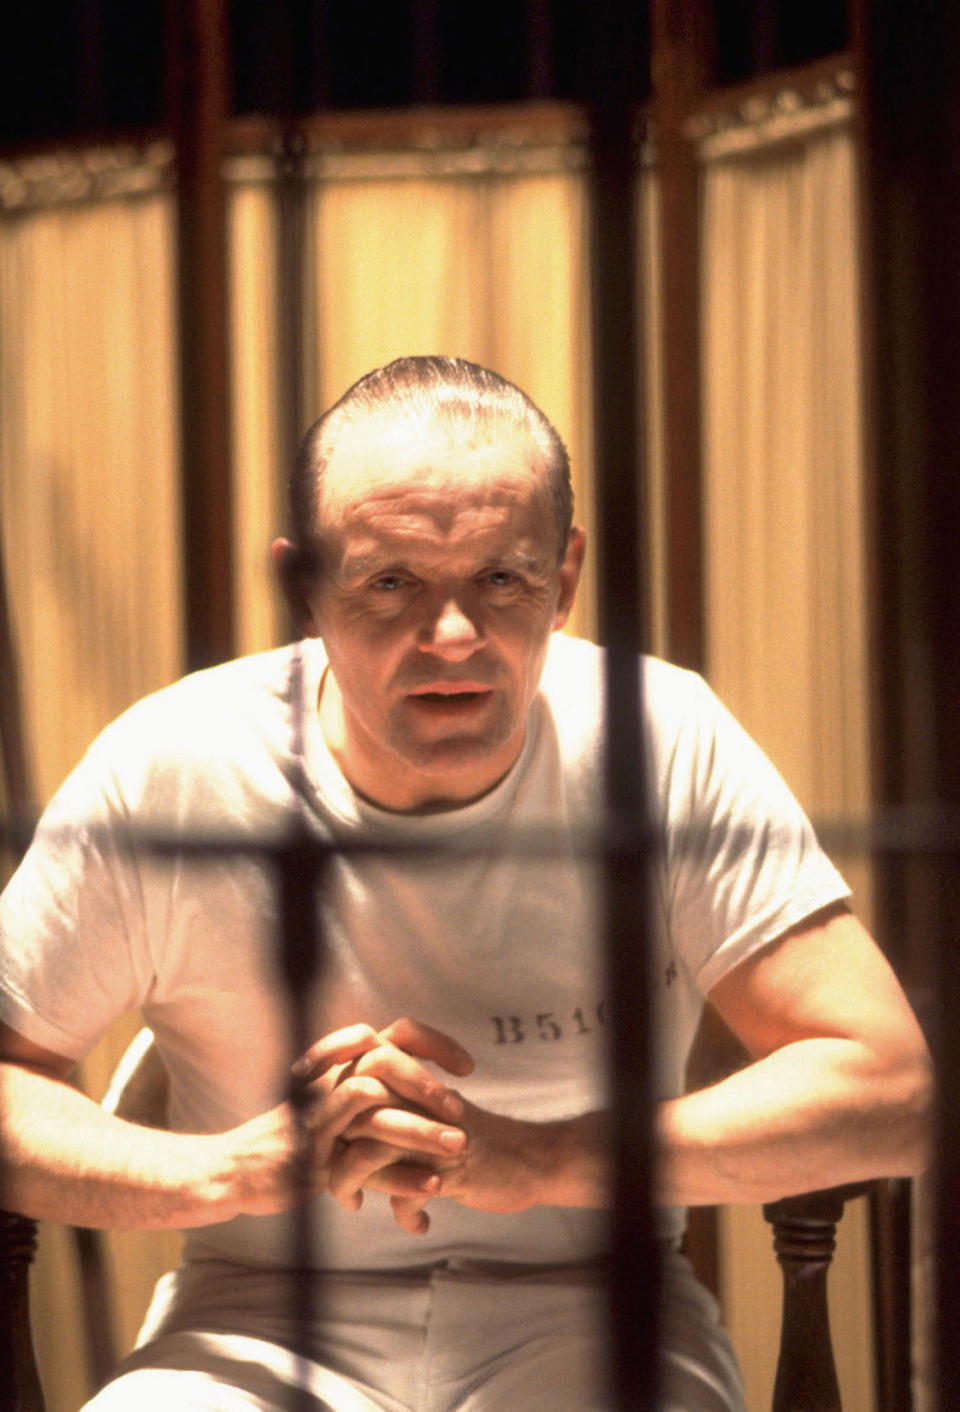 Hannibal Lecter behind bars in prison